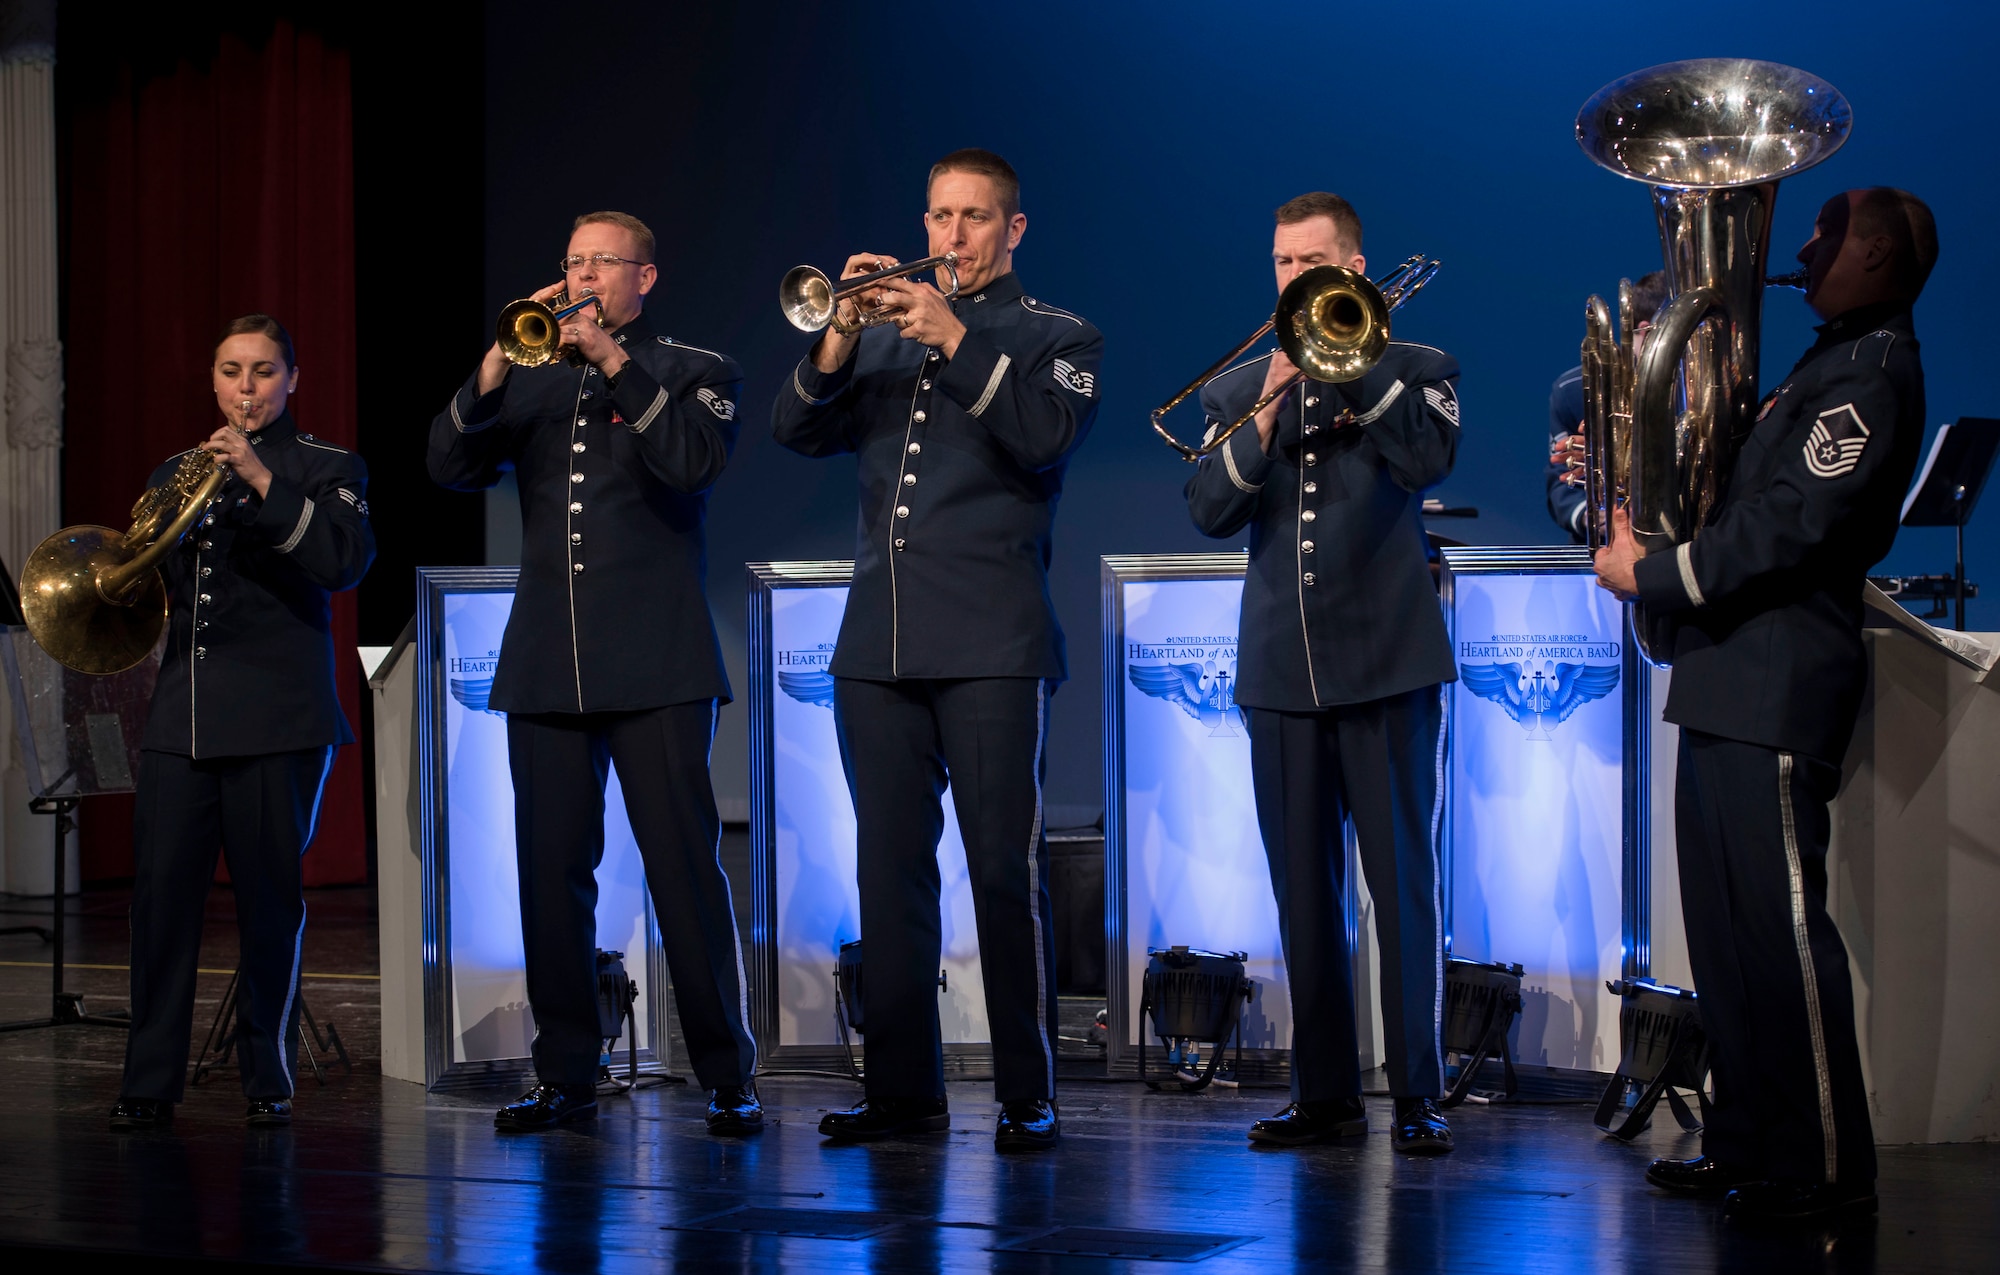 Members of Offutt Brass play the Air Force Song during a performance at the Performing Arts Center Historic Theater in Rapid City, S.D., on Feb. 22, 2017. Offutt Brass is the brass ensemble of the U.S. Air Force Heartland of America Band that performs around the U.S. to celebrate America and patriotism. (U.S. Air Force photo by Airman 1st Class Randahl J. Jenson)